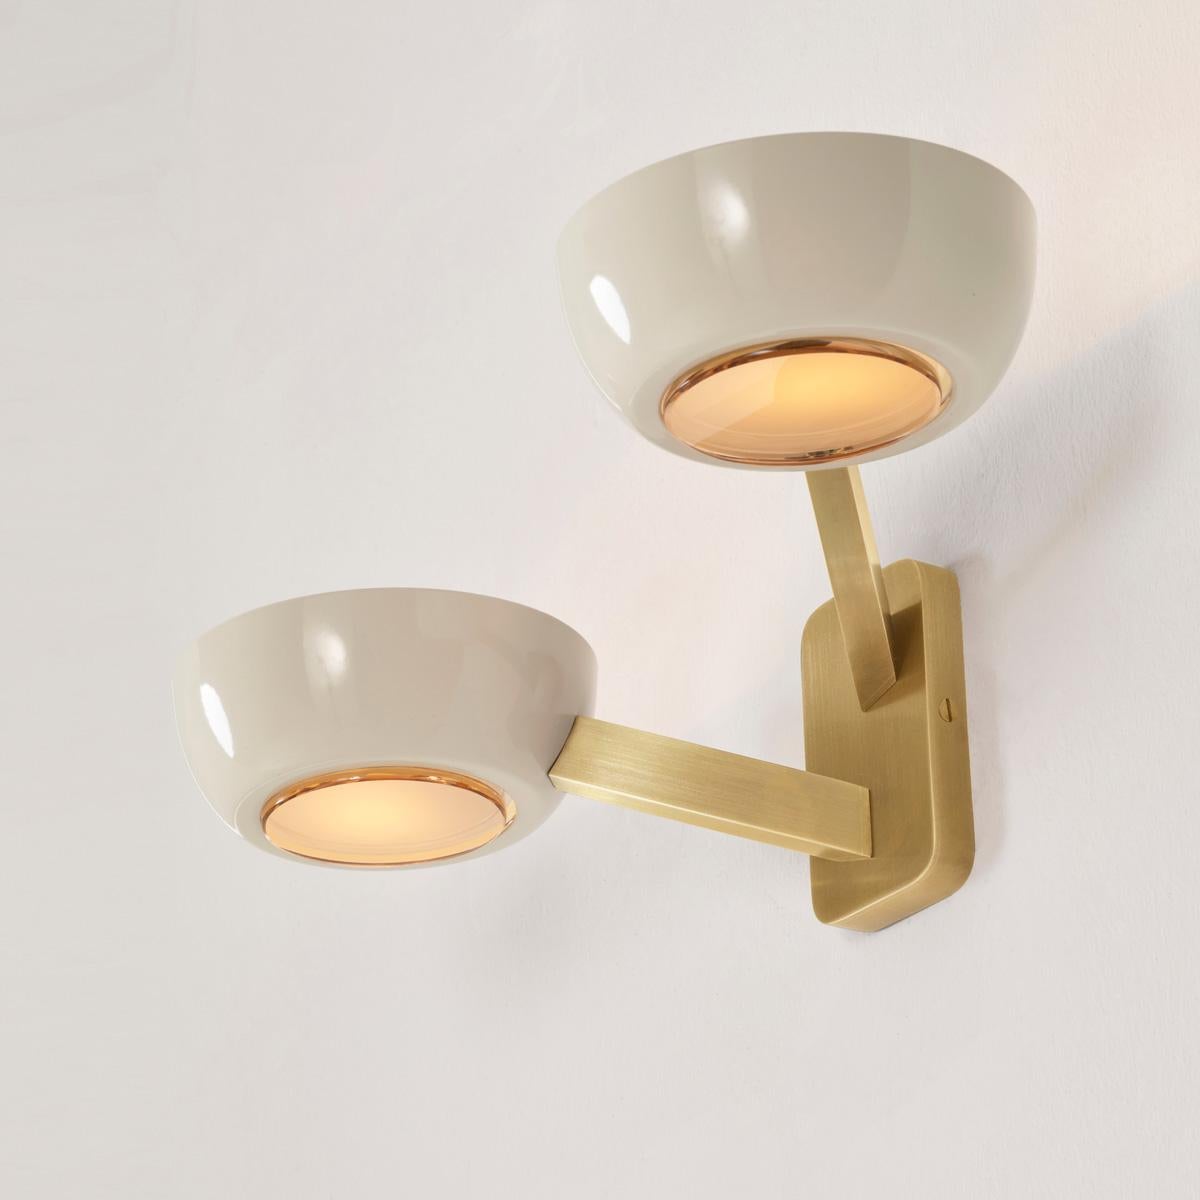 Modern Rose Double Wall Light by Gaspare Asaro. Satin Brass Finish. For Sale